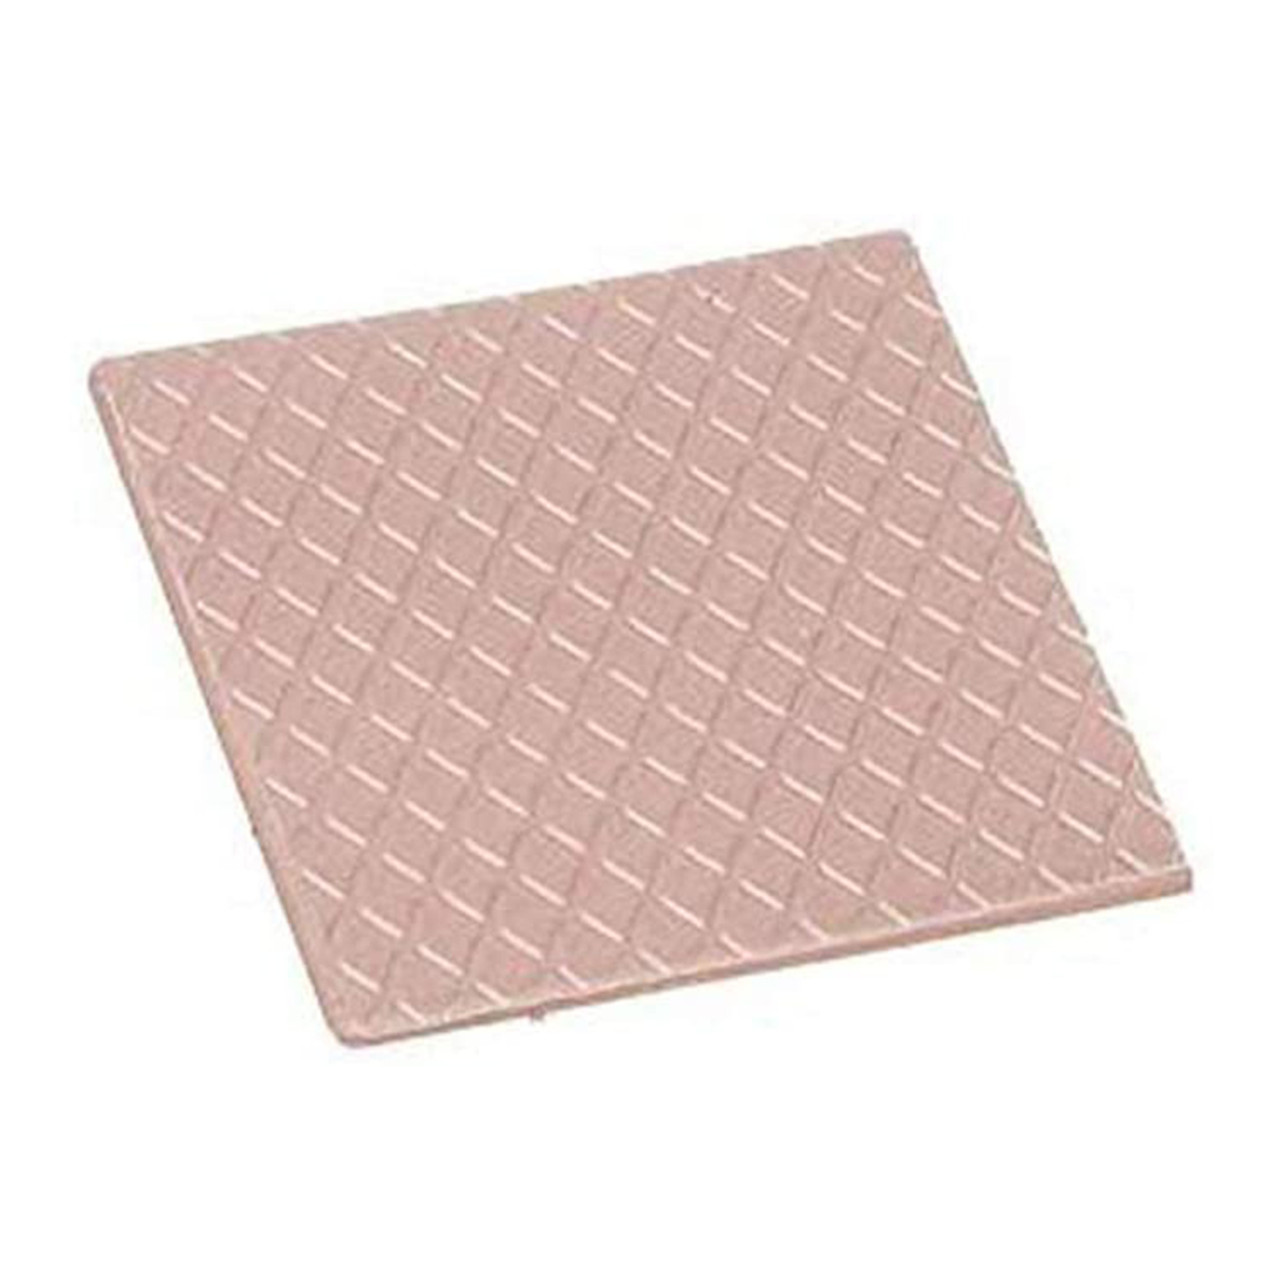 Thermal Grizzly Minus Pad 8, 30 x 30 x 1.5 mm (TG-MP8-30-30-15-1R)